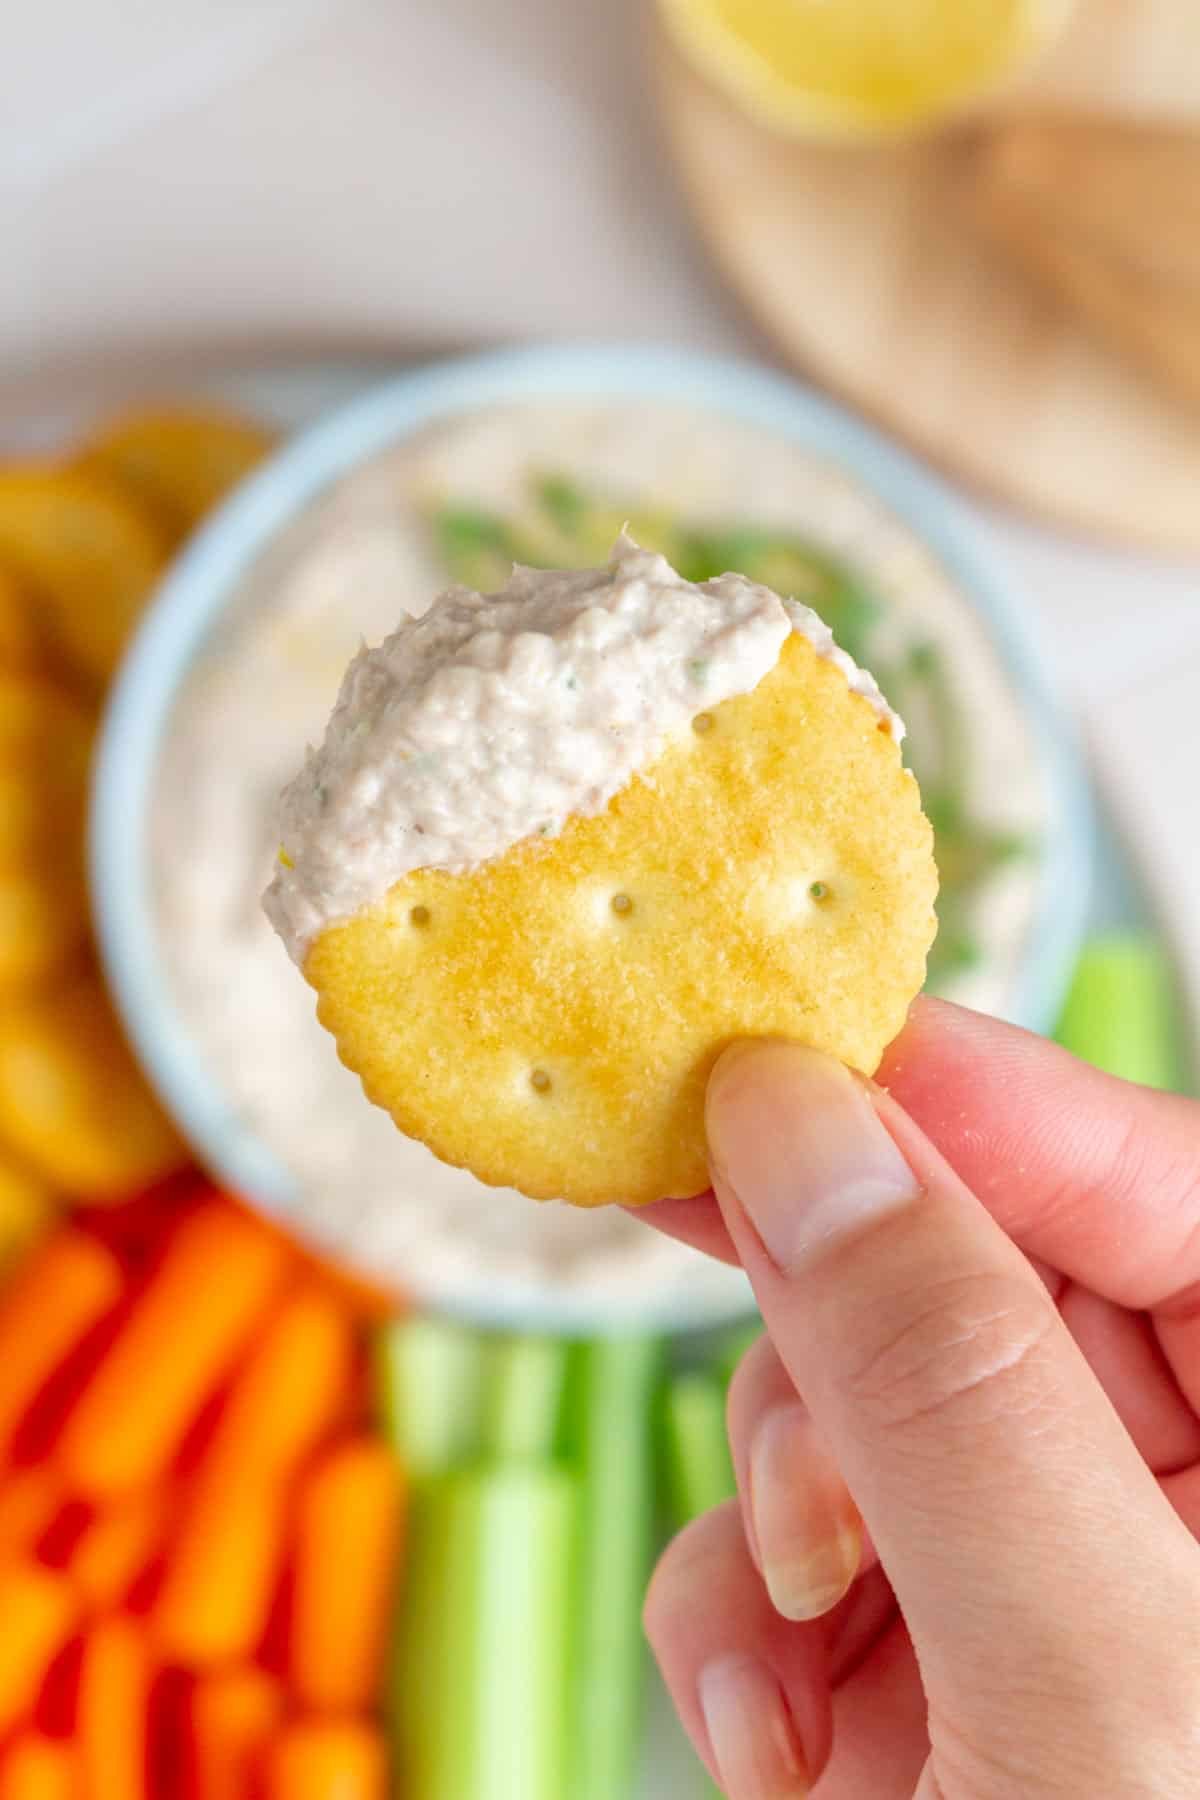 A hand holding up a cracker with tuna dip.